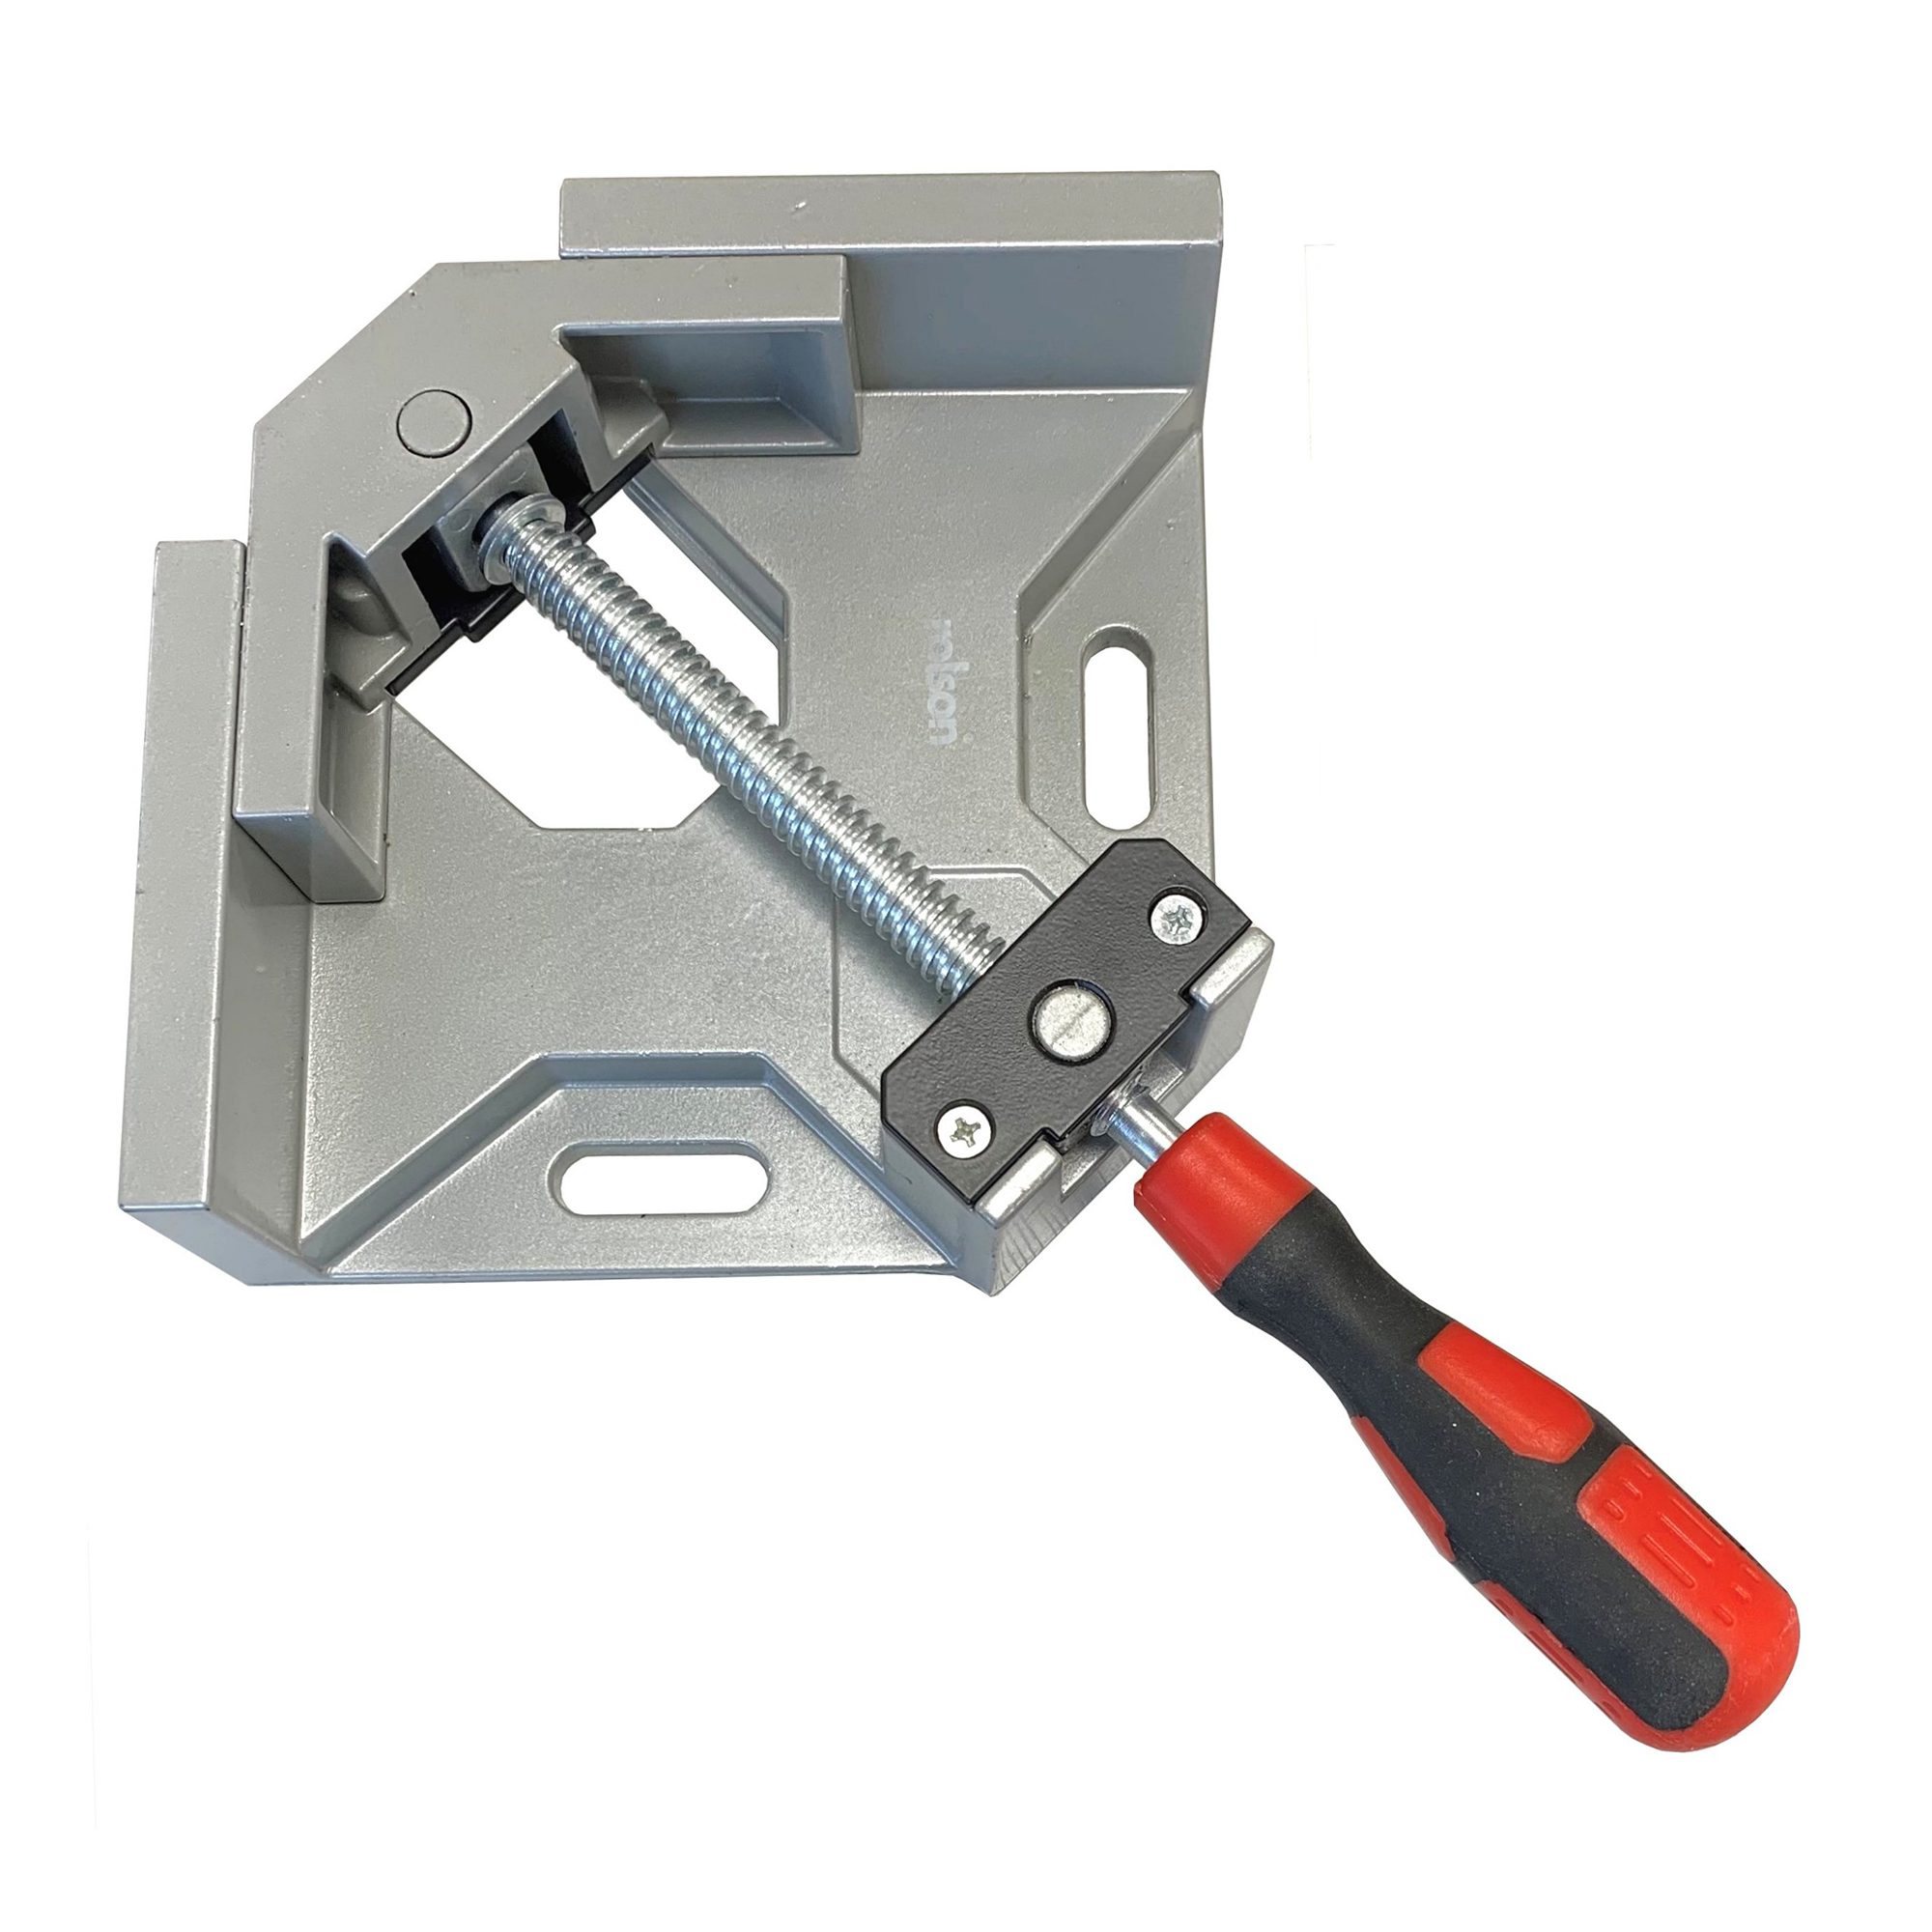 Right Angle (90°) Corner Clamp (14307) ideal for woodworkers